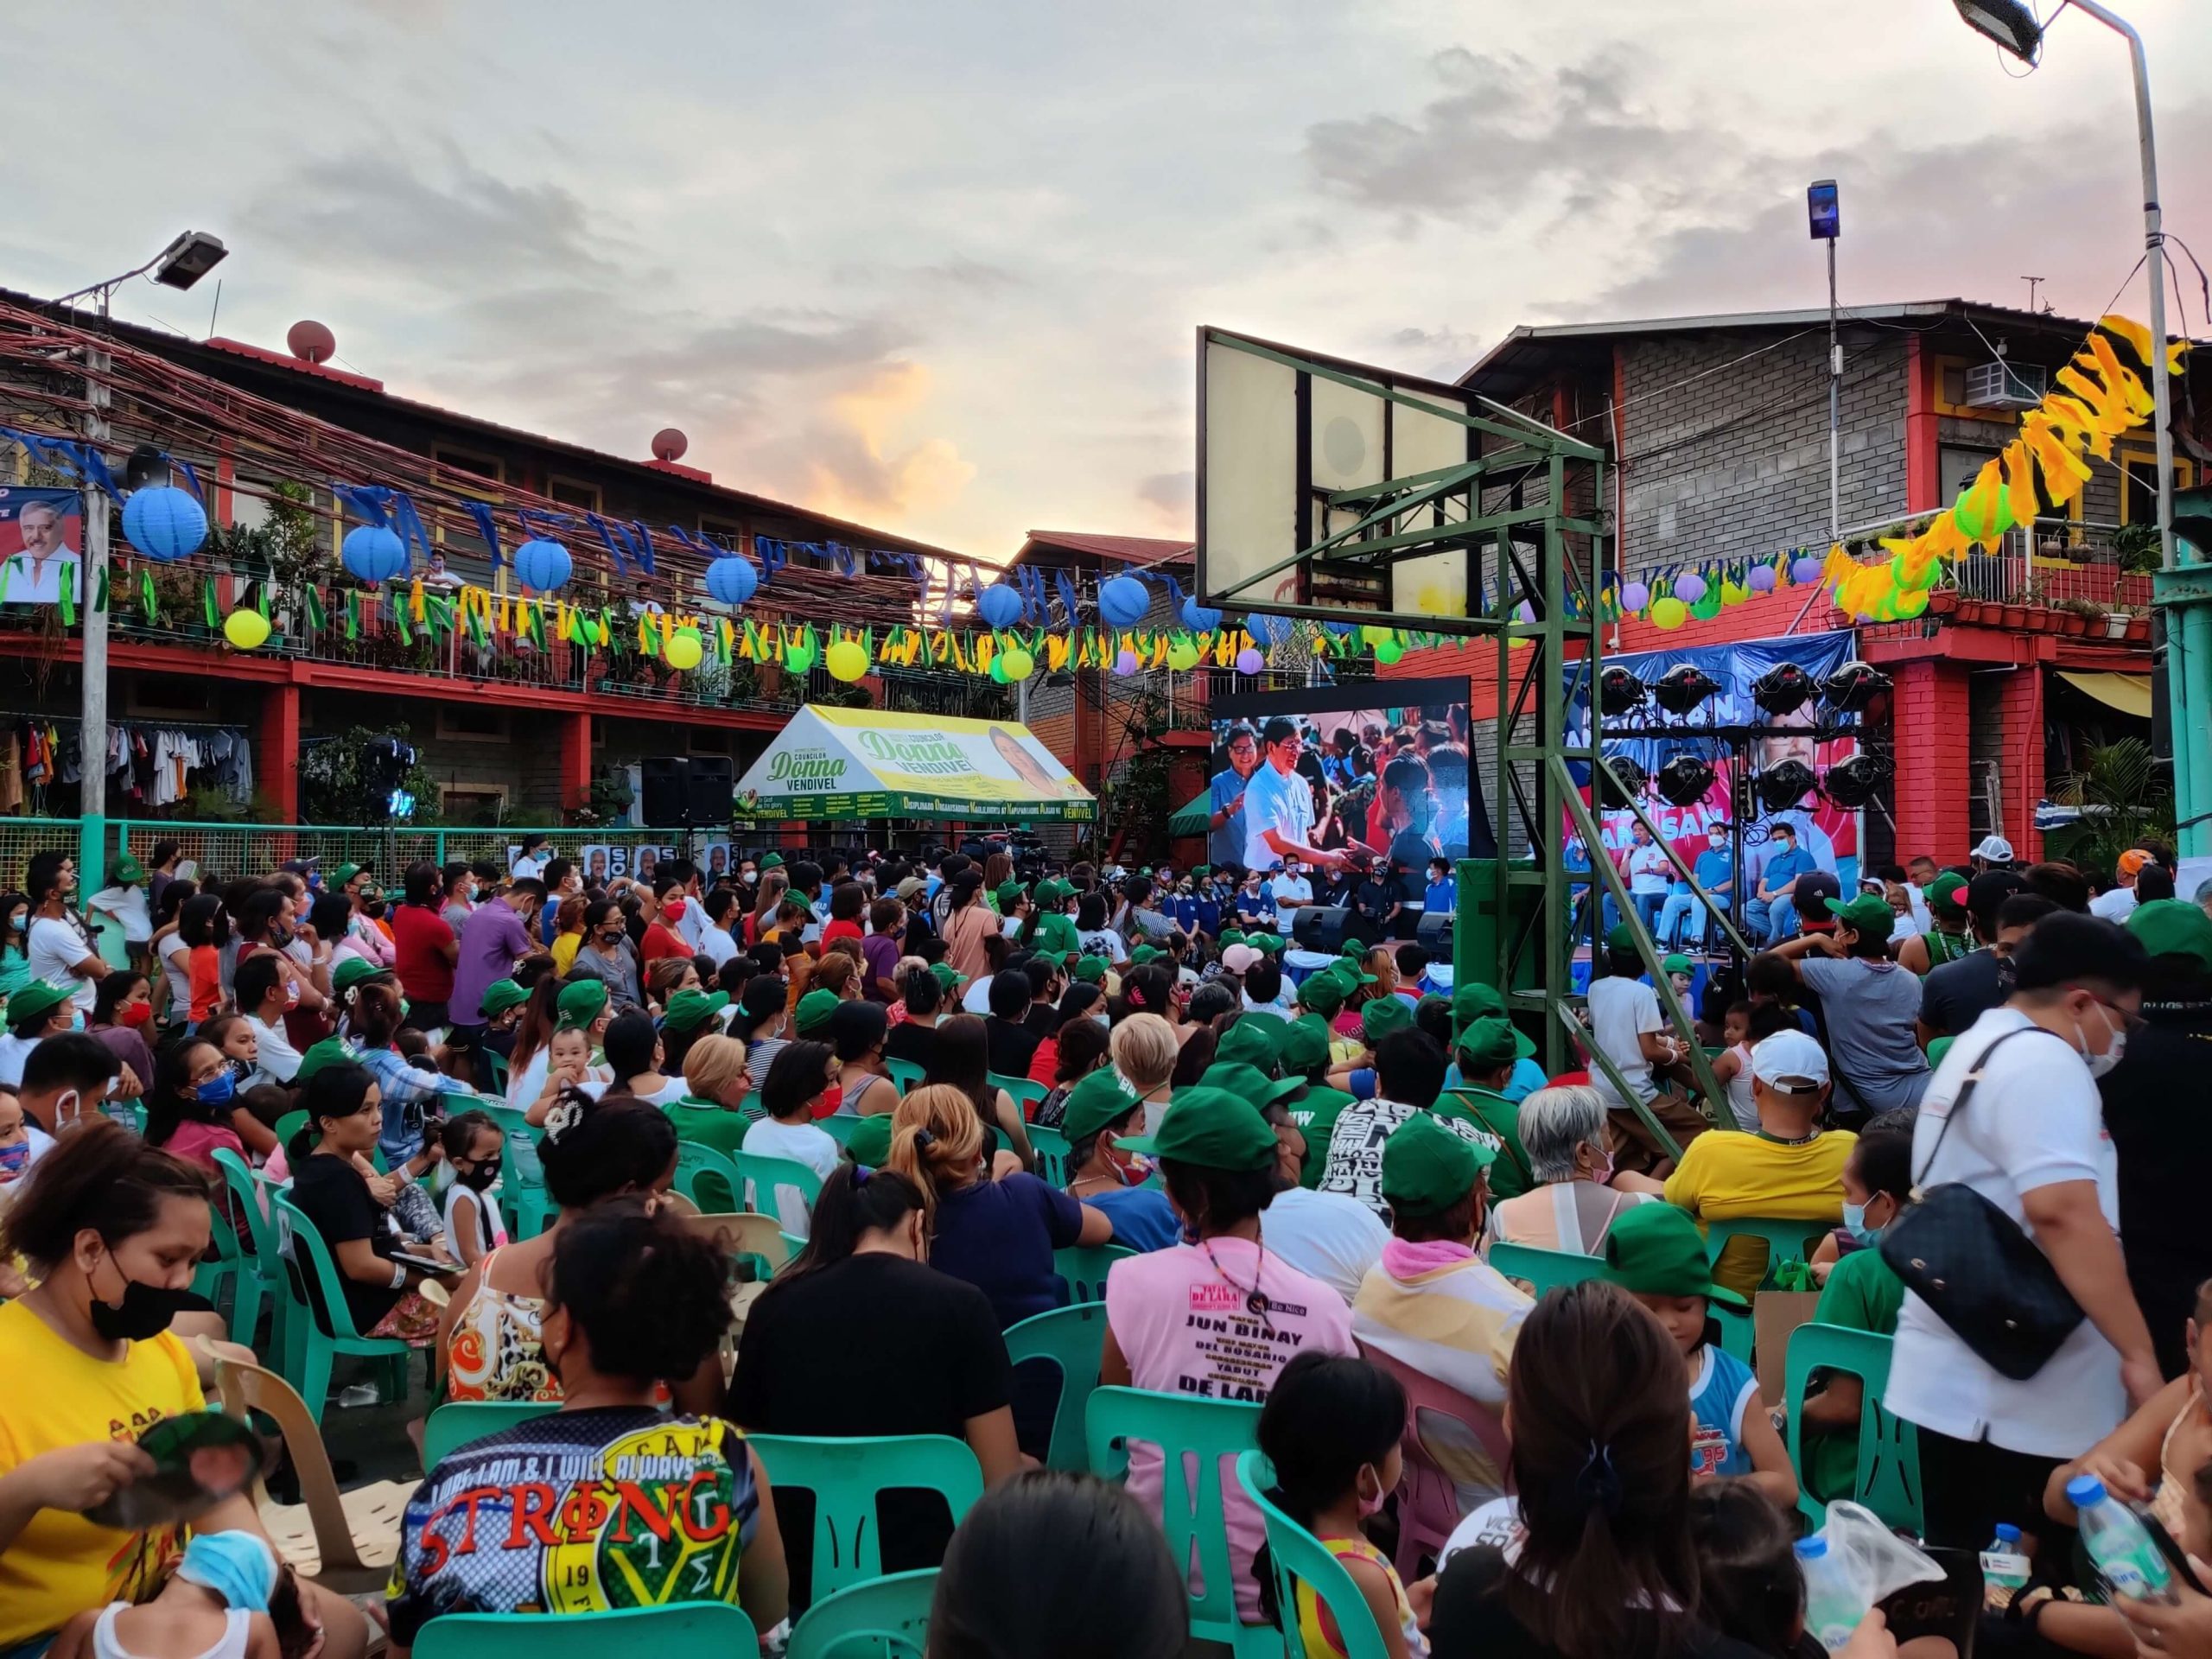 People gather at the St. Hannibal Compound in Brgy. 165, Malibay, Pasay City to listen to presidential candidate Ping Lacson, his running mate Tito Sotto, and senatorial candidate Guillermo Eleazar on March 26. Photo by Enrico Berdos/VERA Files